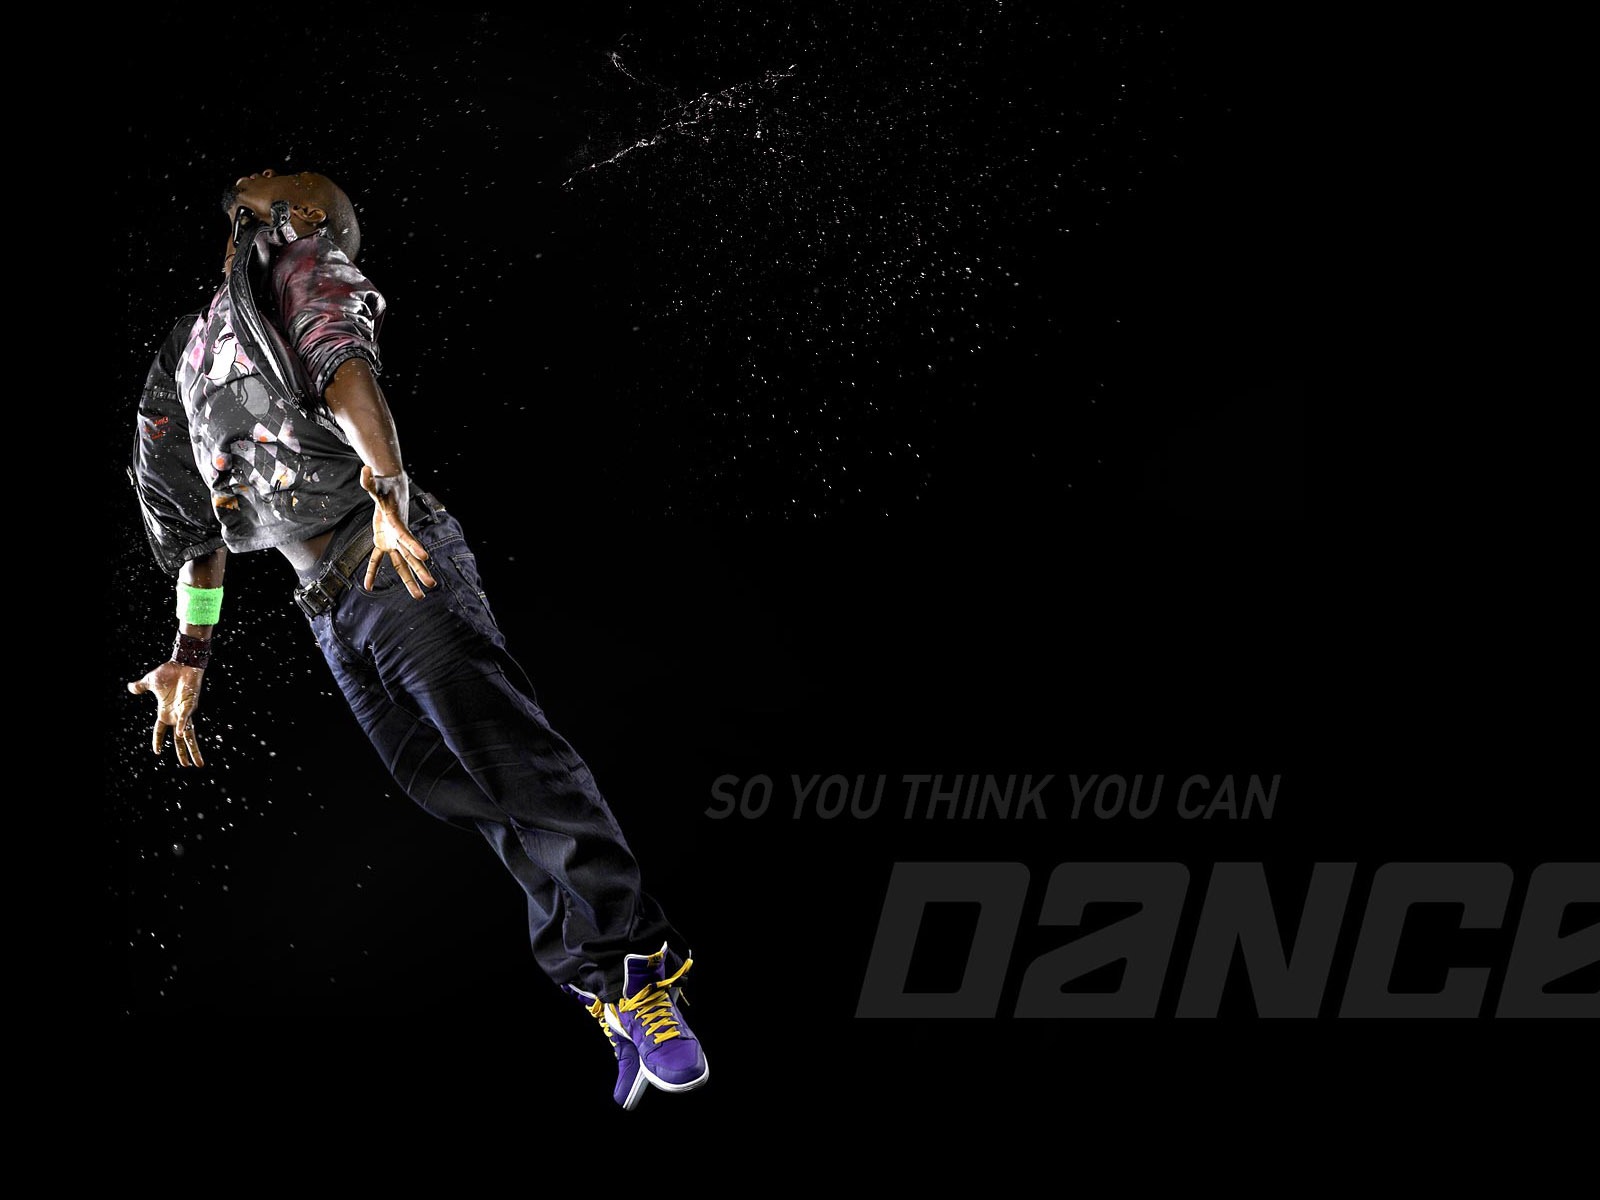 So You Think You Can Dance wallpaper (1) #10 - 1600x1200